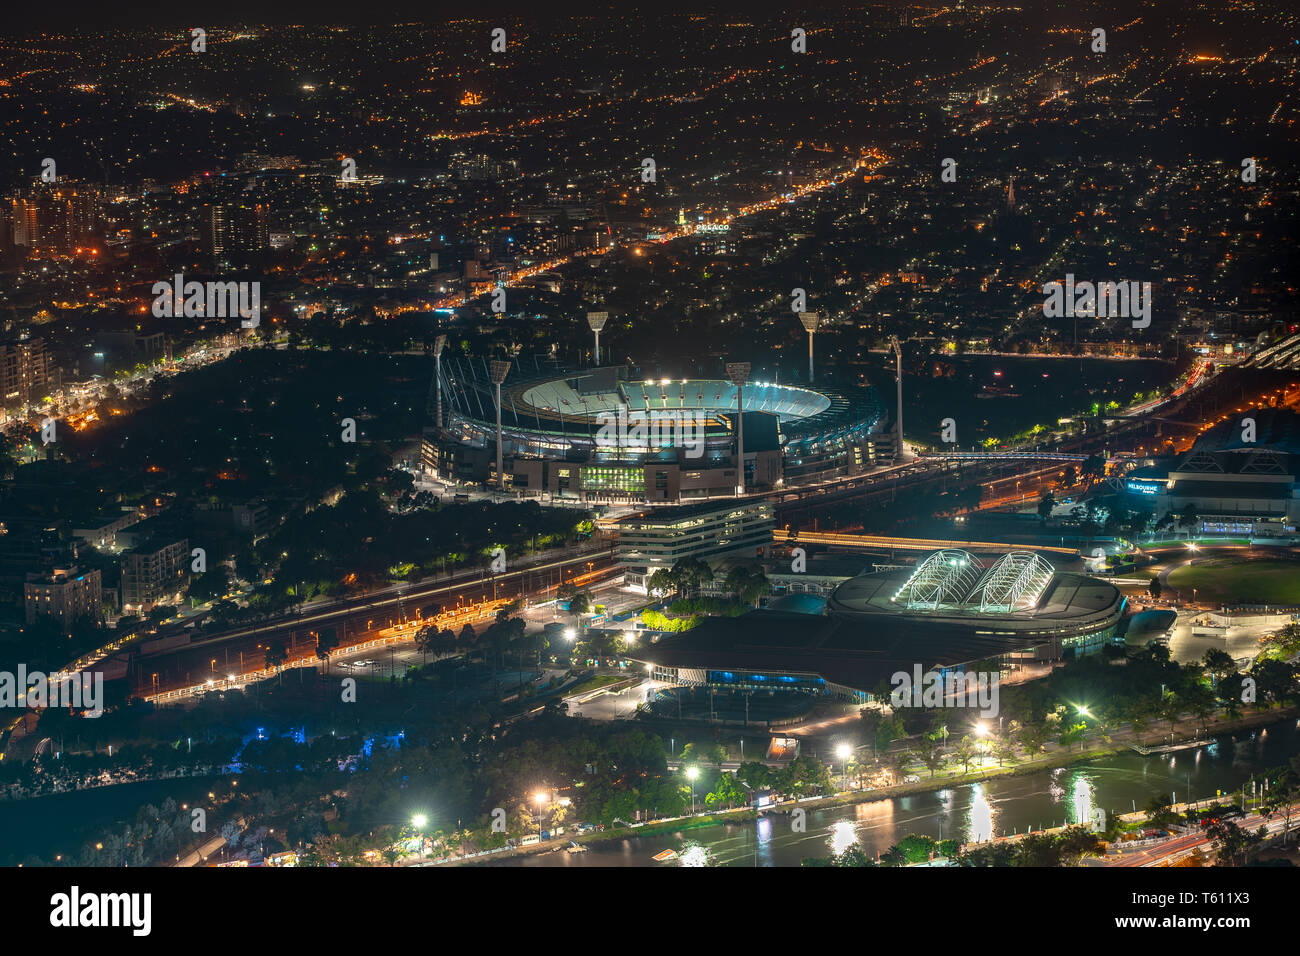 Melbourne Cricket Grounds evening view Stock Photo